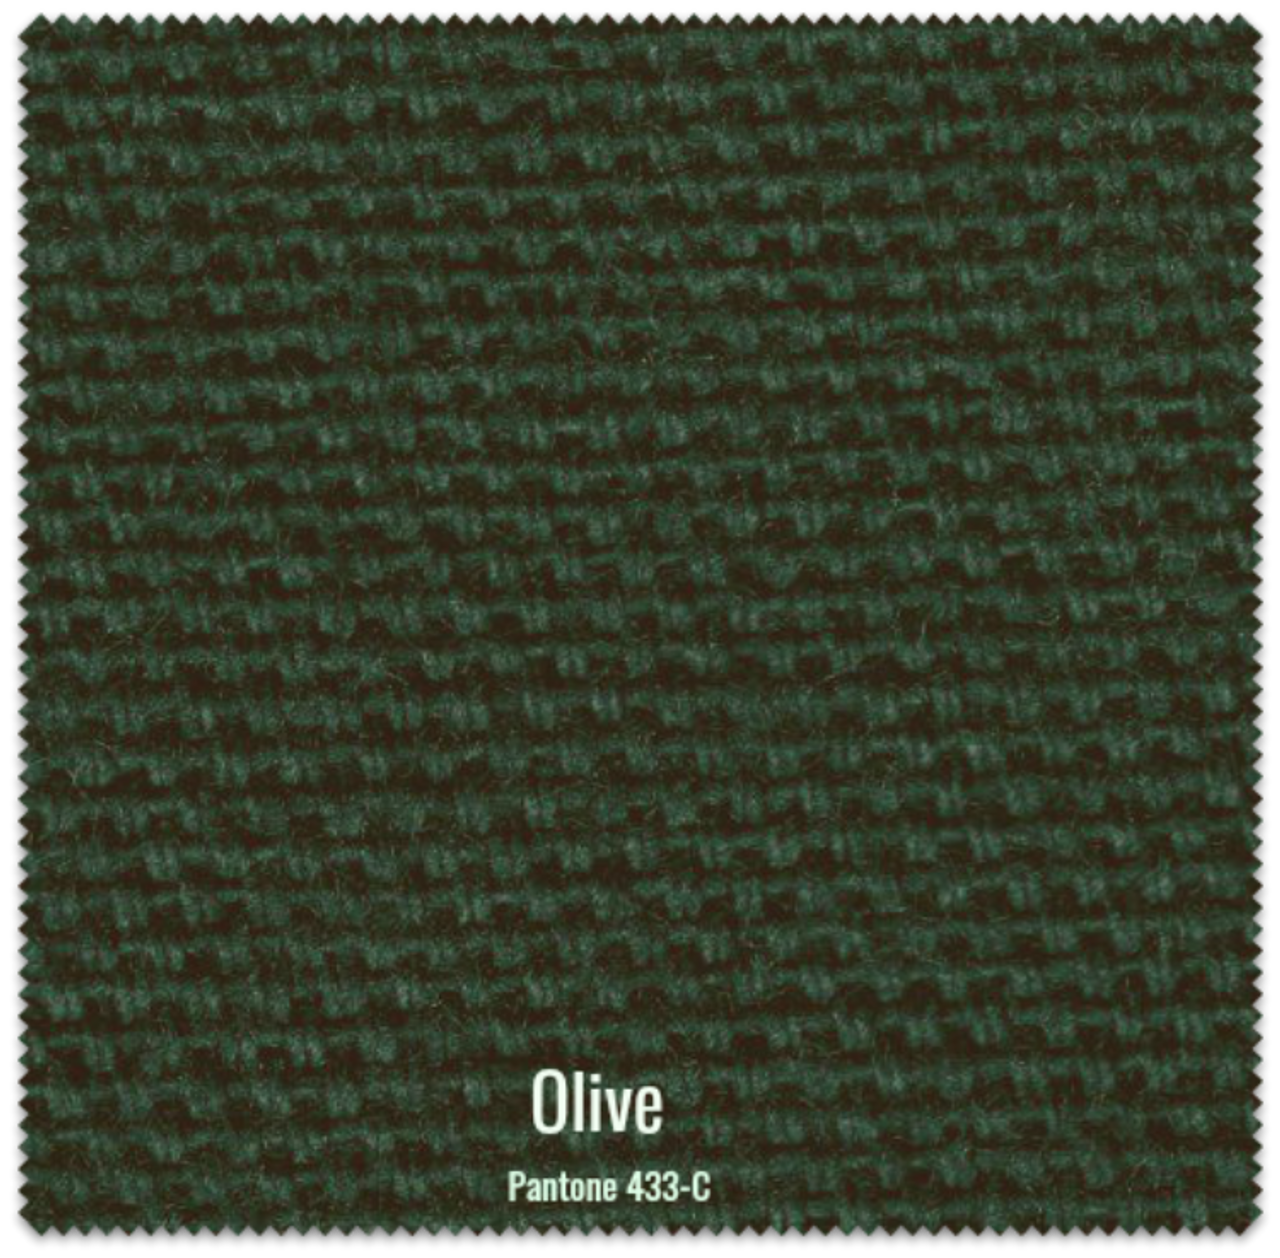 Fabric Sample Only - Durable Duck Canvas - Choice of Solid Colors